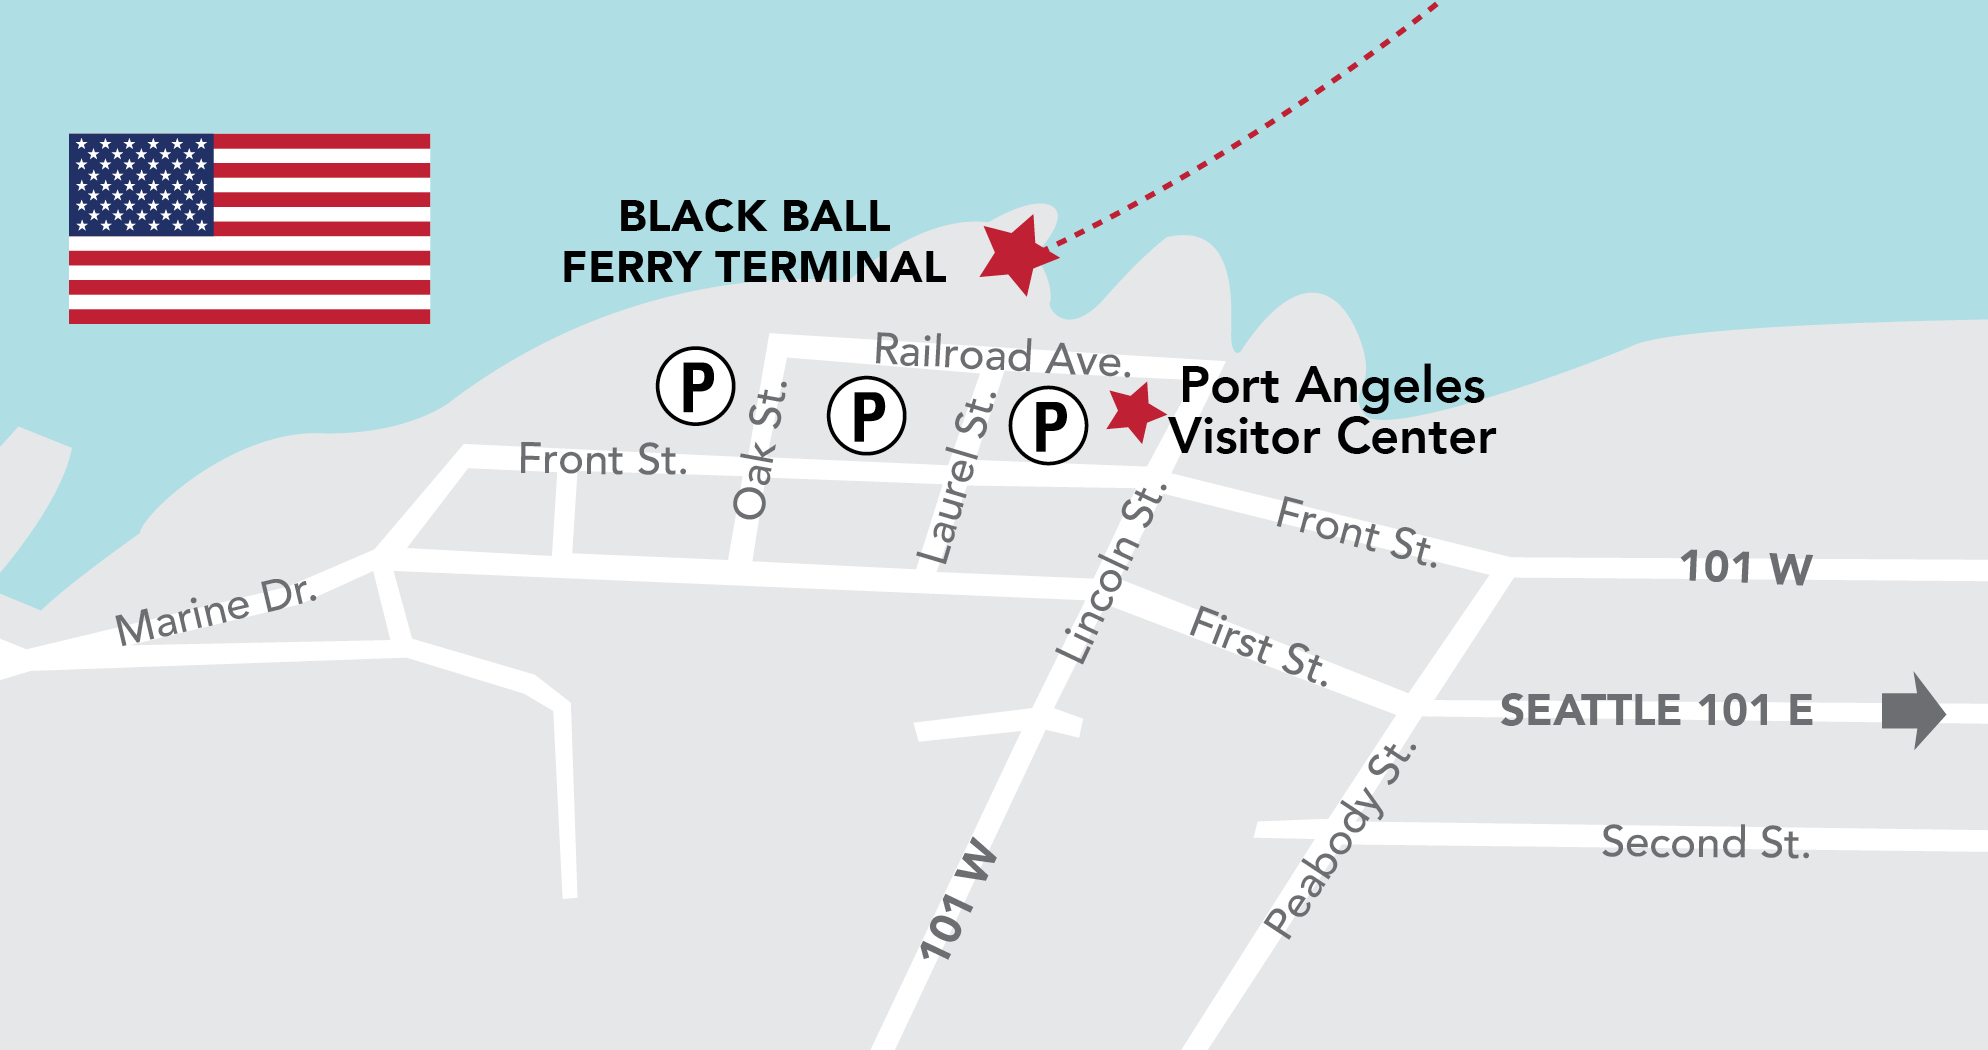 Black Ball Ferry Line's Port Angeles terminal location on a map